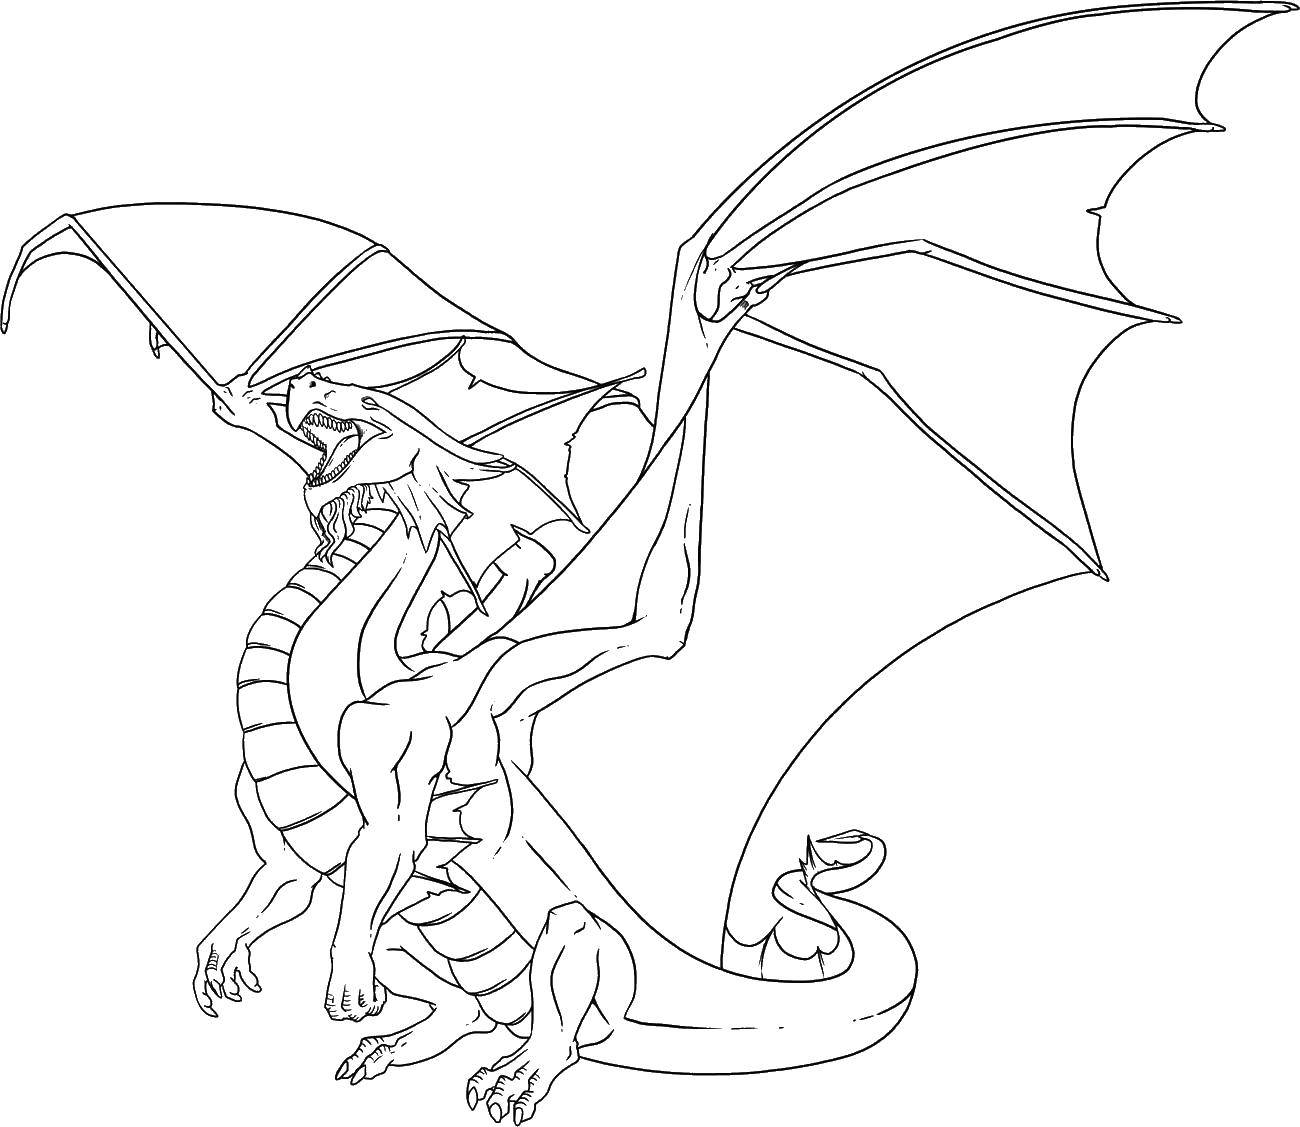 Coloring Giant wings. Category Dragons. Tags:  Dragons.